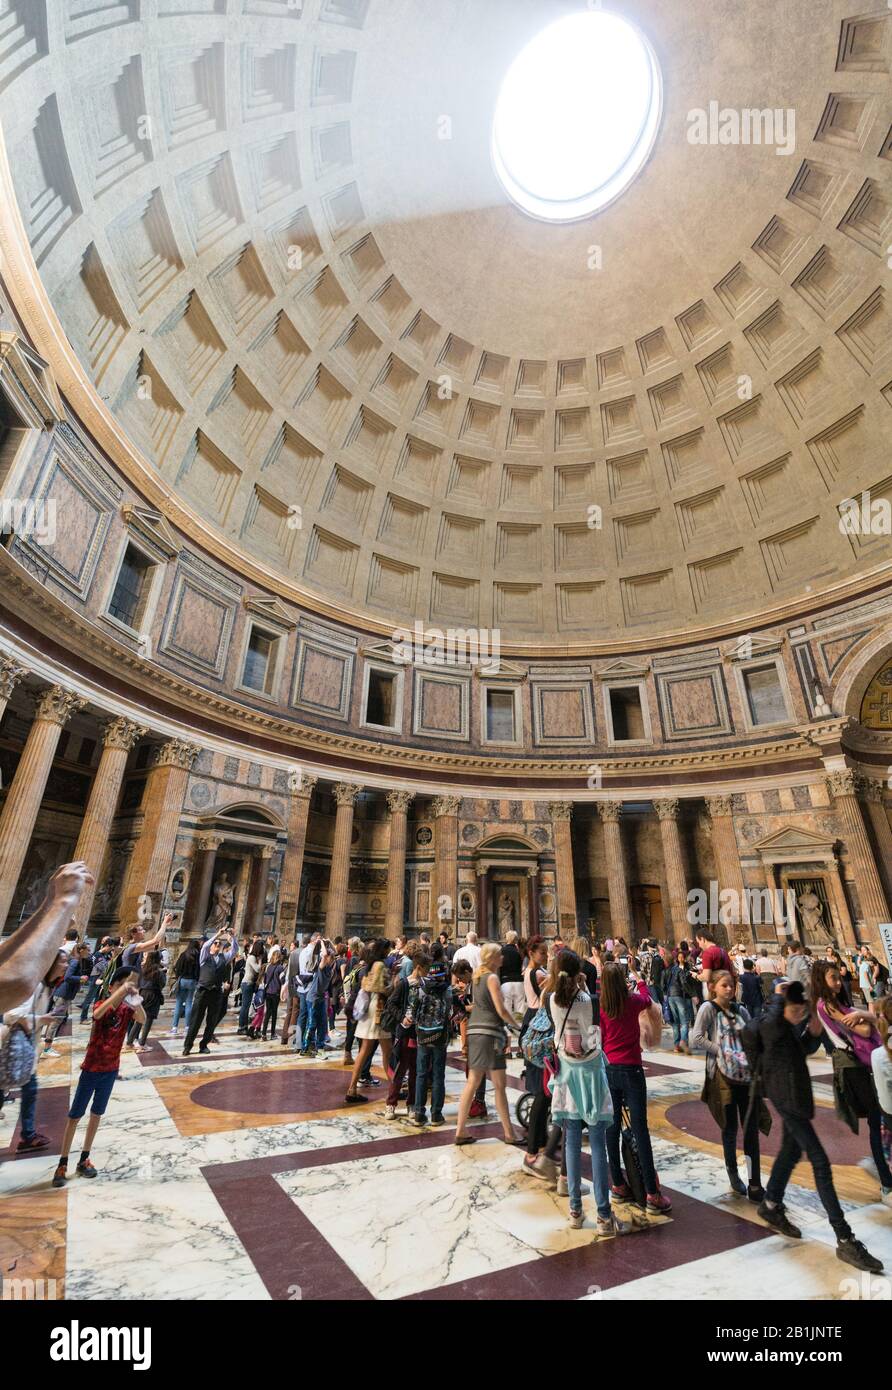 Inside the Pantheon in Rome, Italy Stock Photo